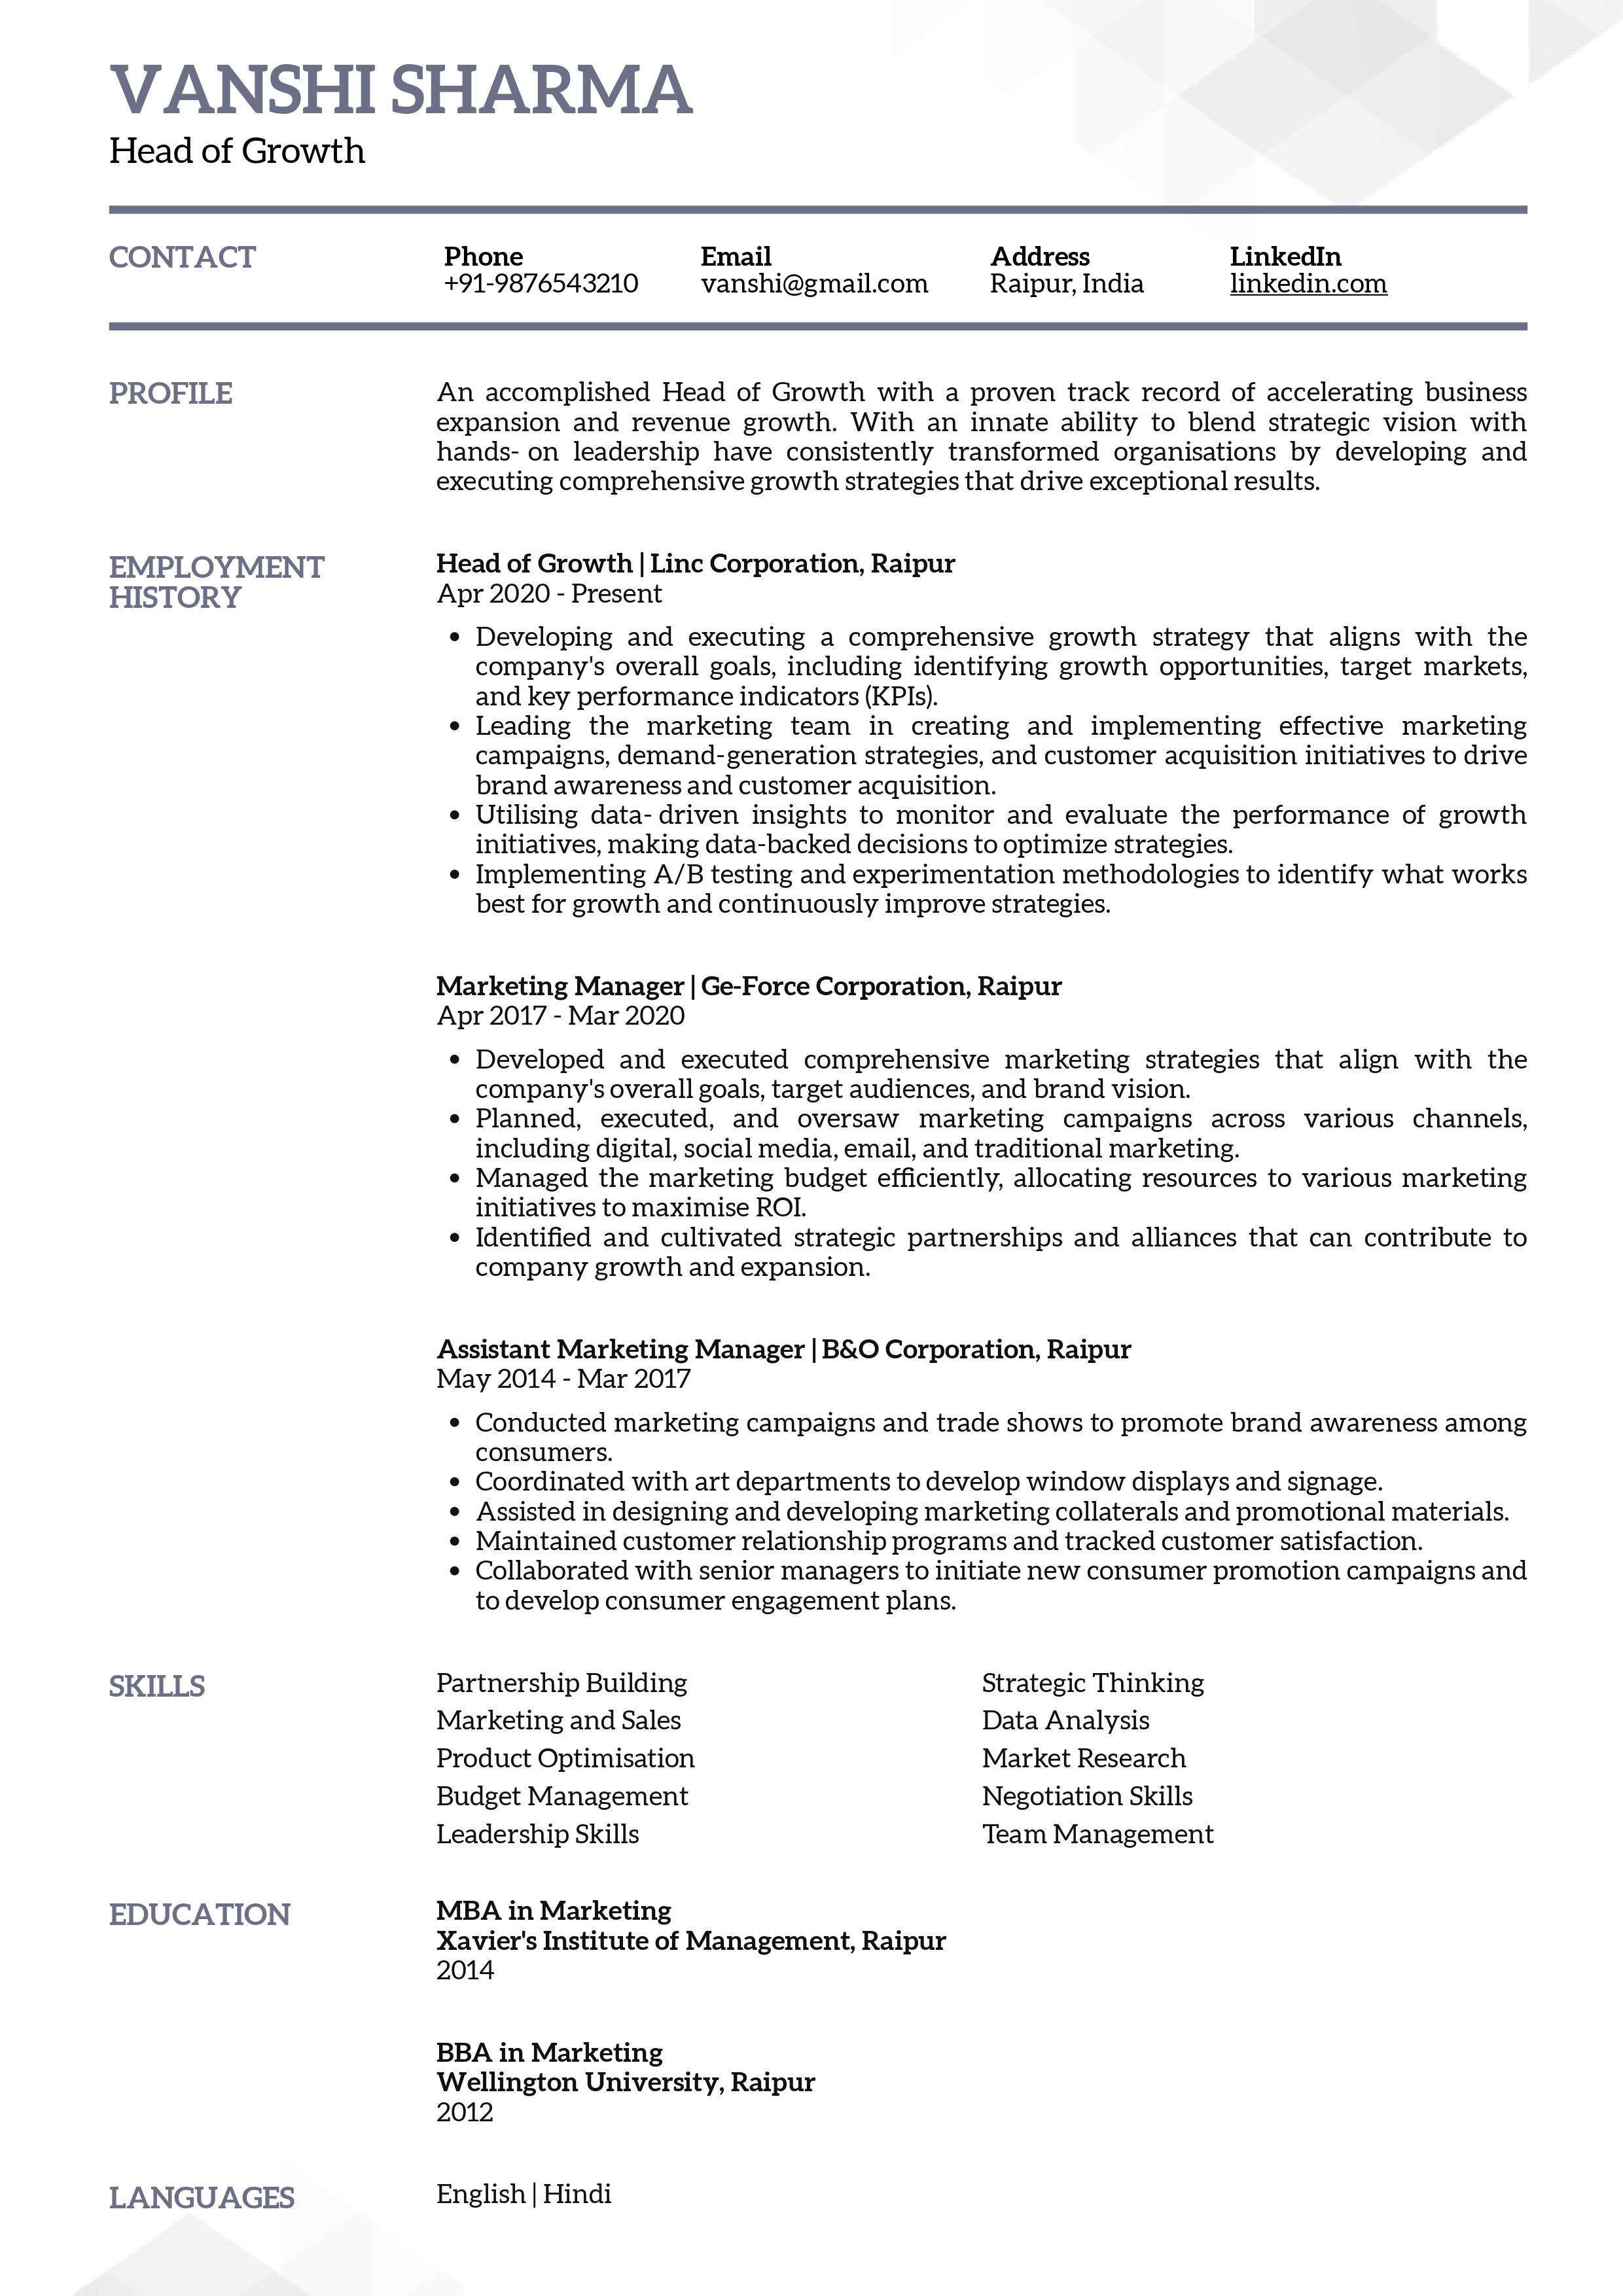 Sample Resume of Head of Growth | Free Resume Templates & Samples on Resumod.co